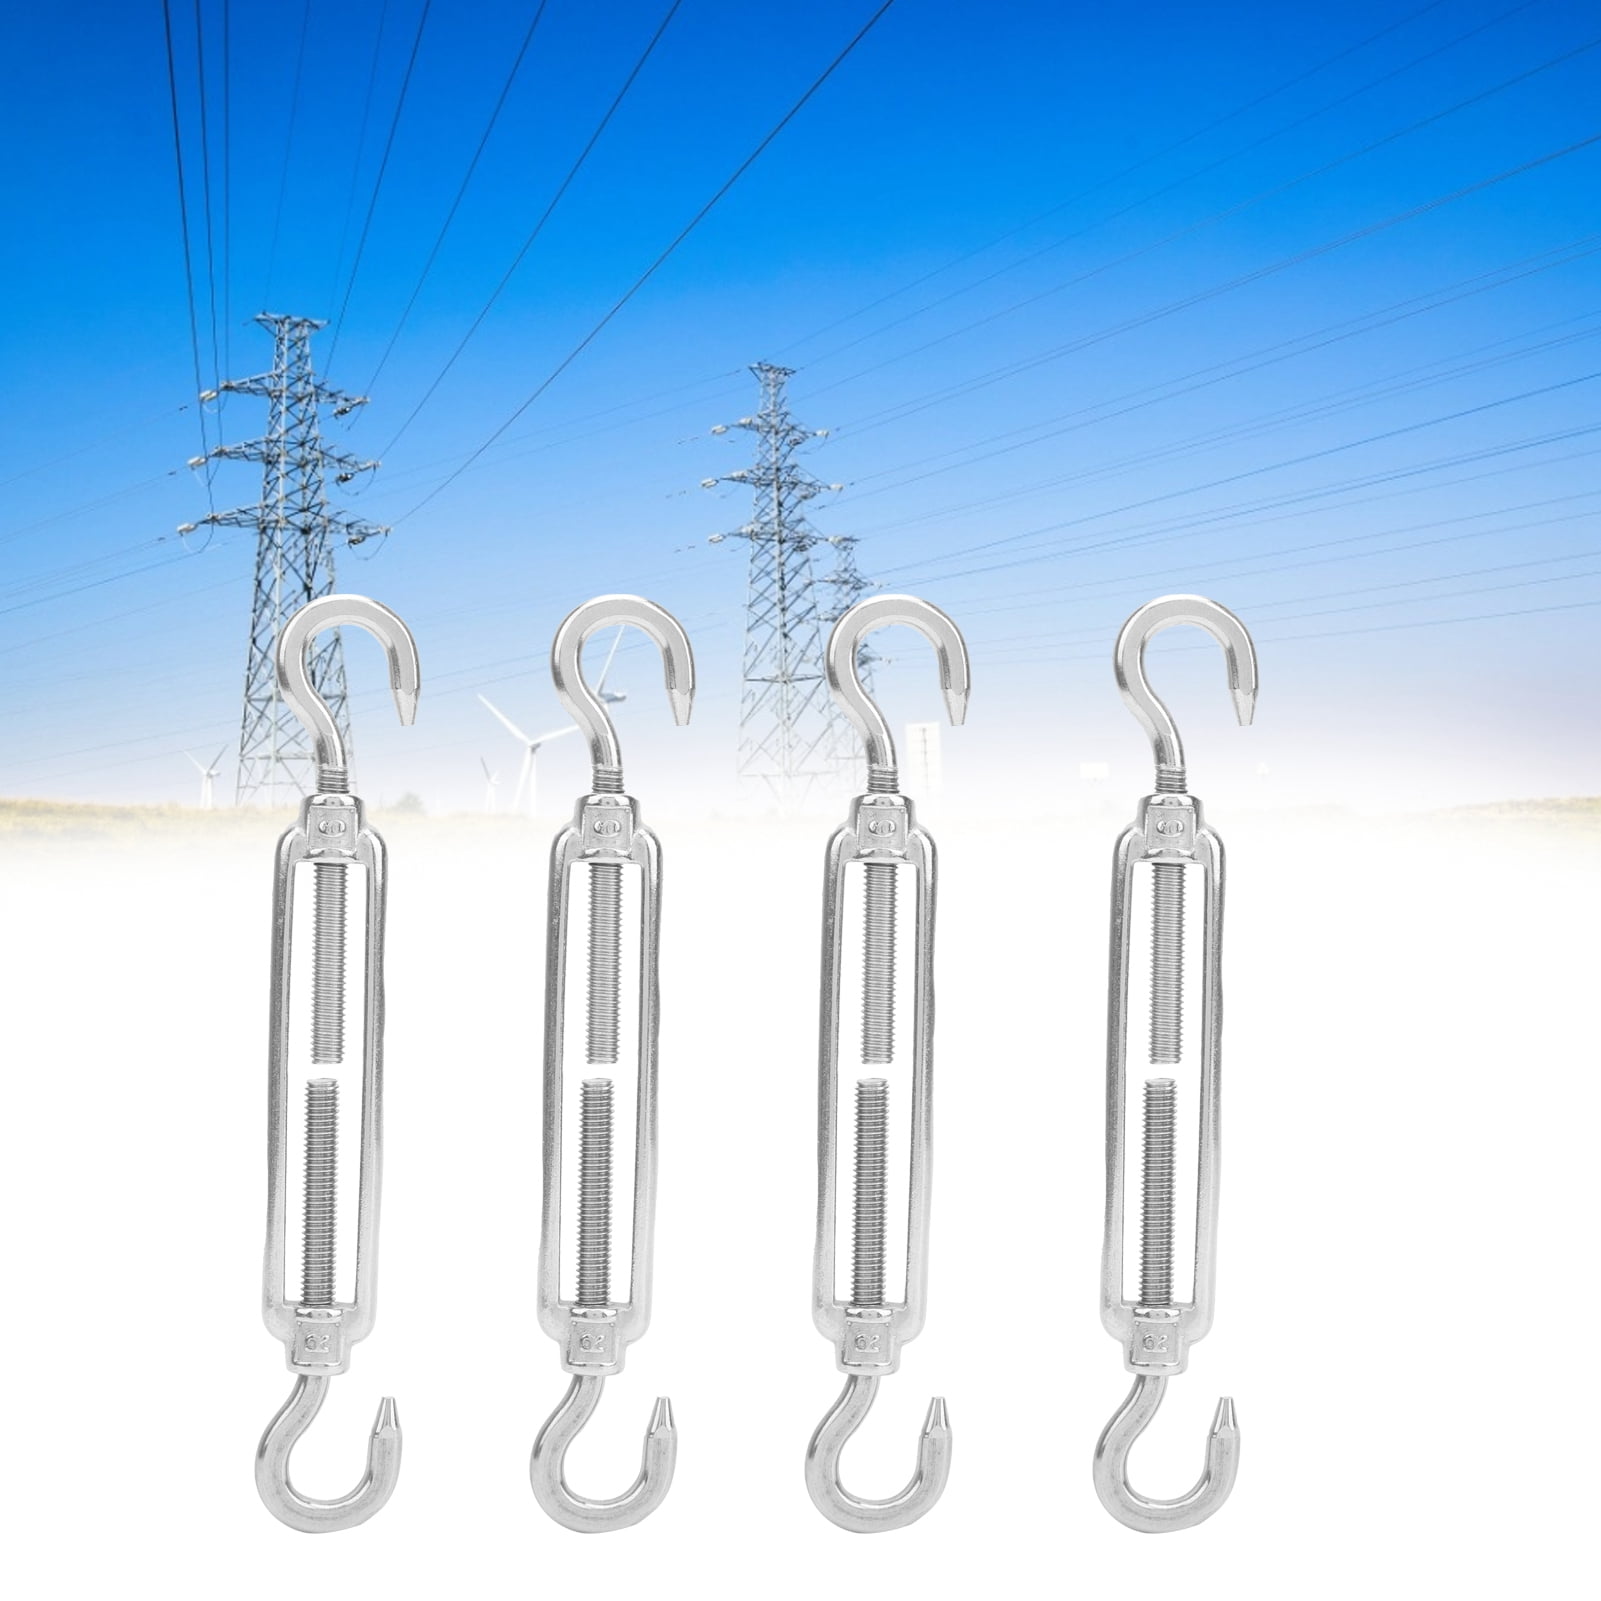 Hook Turnbuckle Wire Tensioner Steel Rope Tensioner Safety Bearing Capacity 100kg for Outdoor 10pcs 304 Strainer Stainless Hook